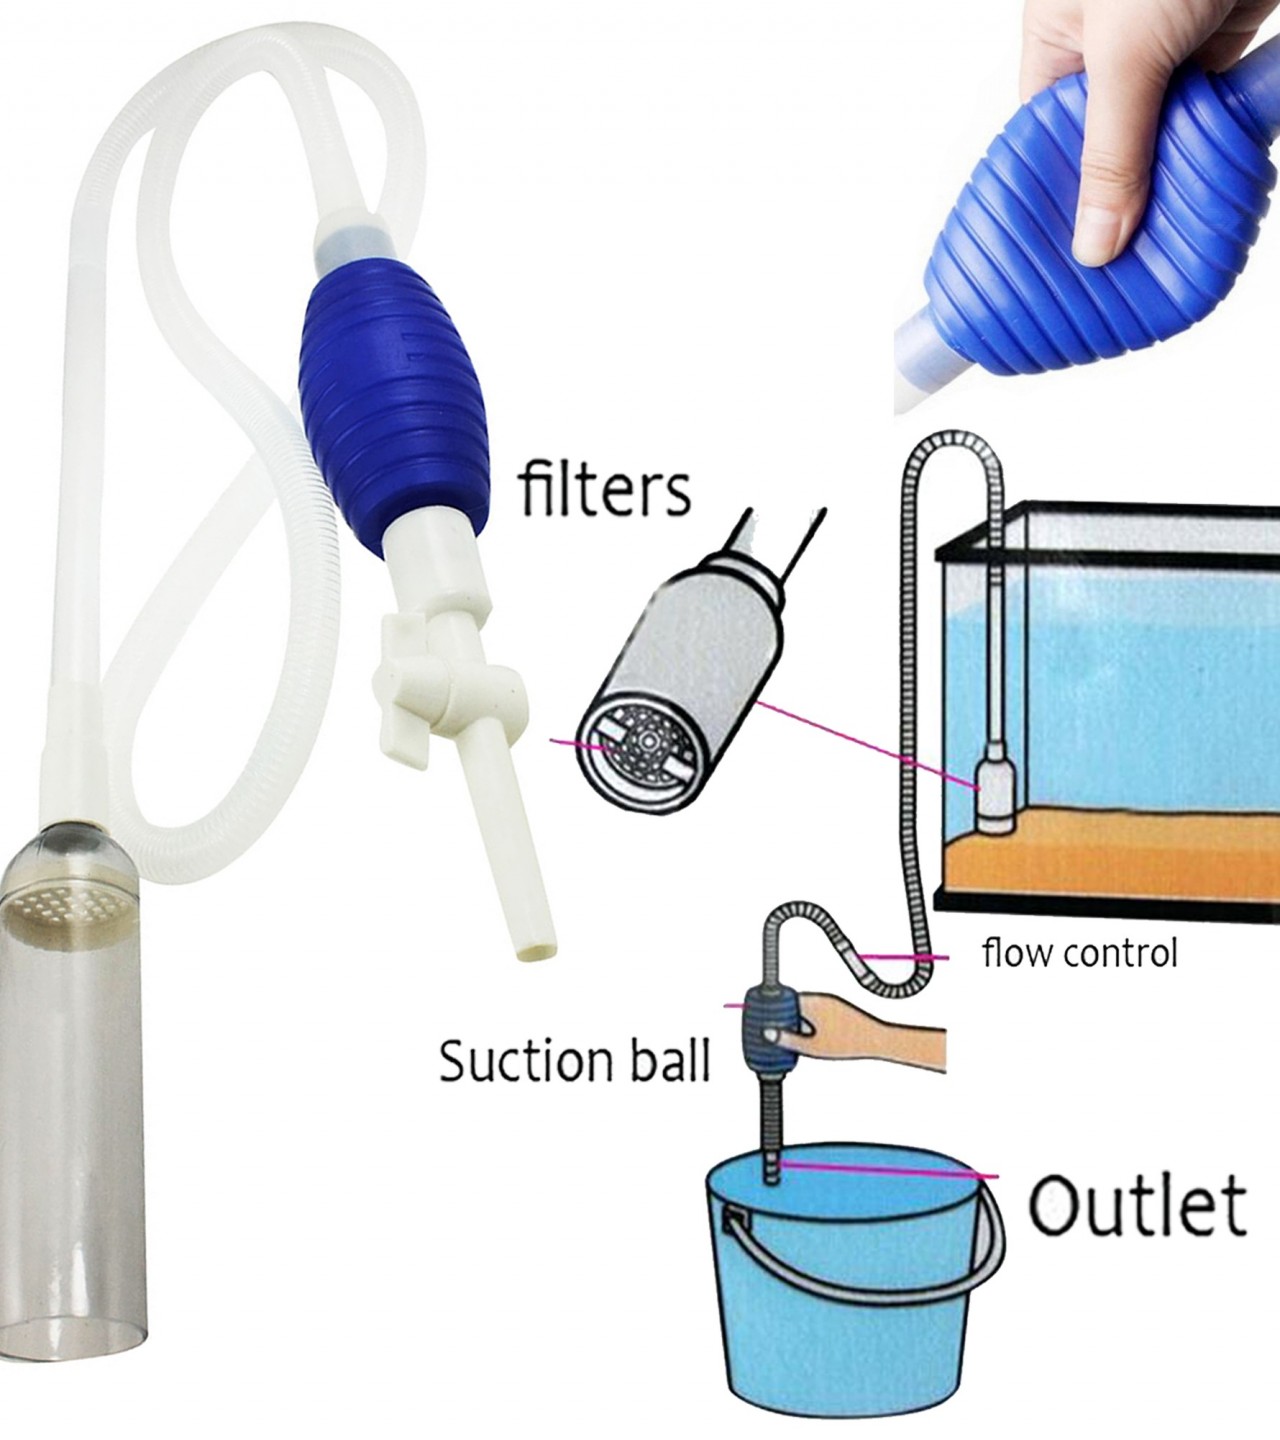 Fish Aquarium Cleaning Siphon Pipe - Water Suction/Changing made easy